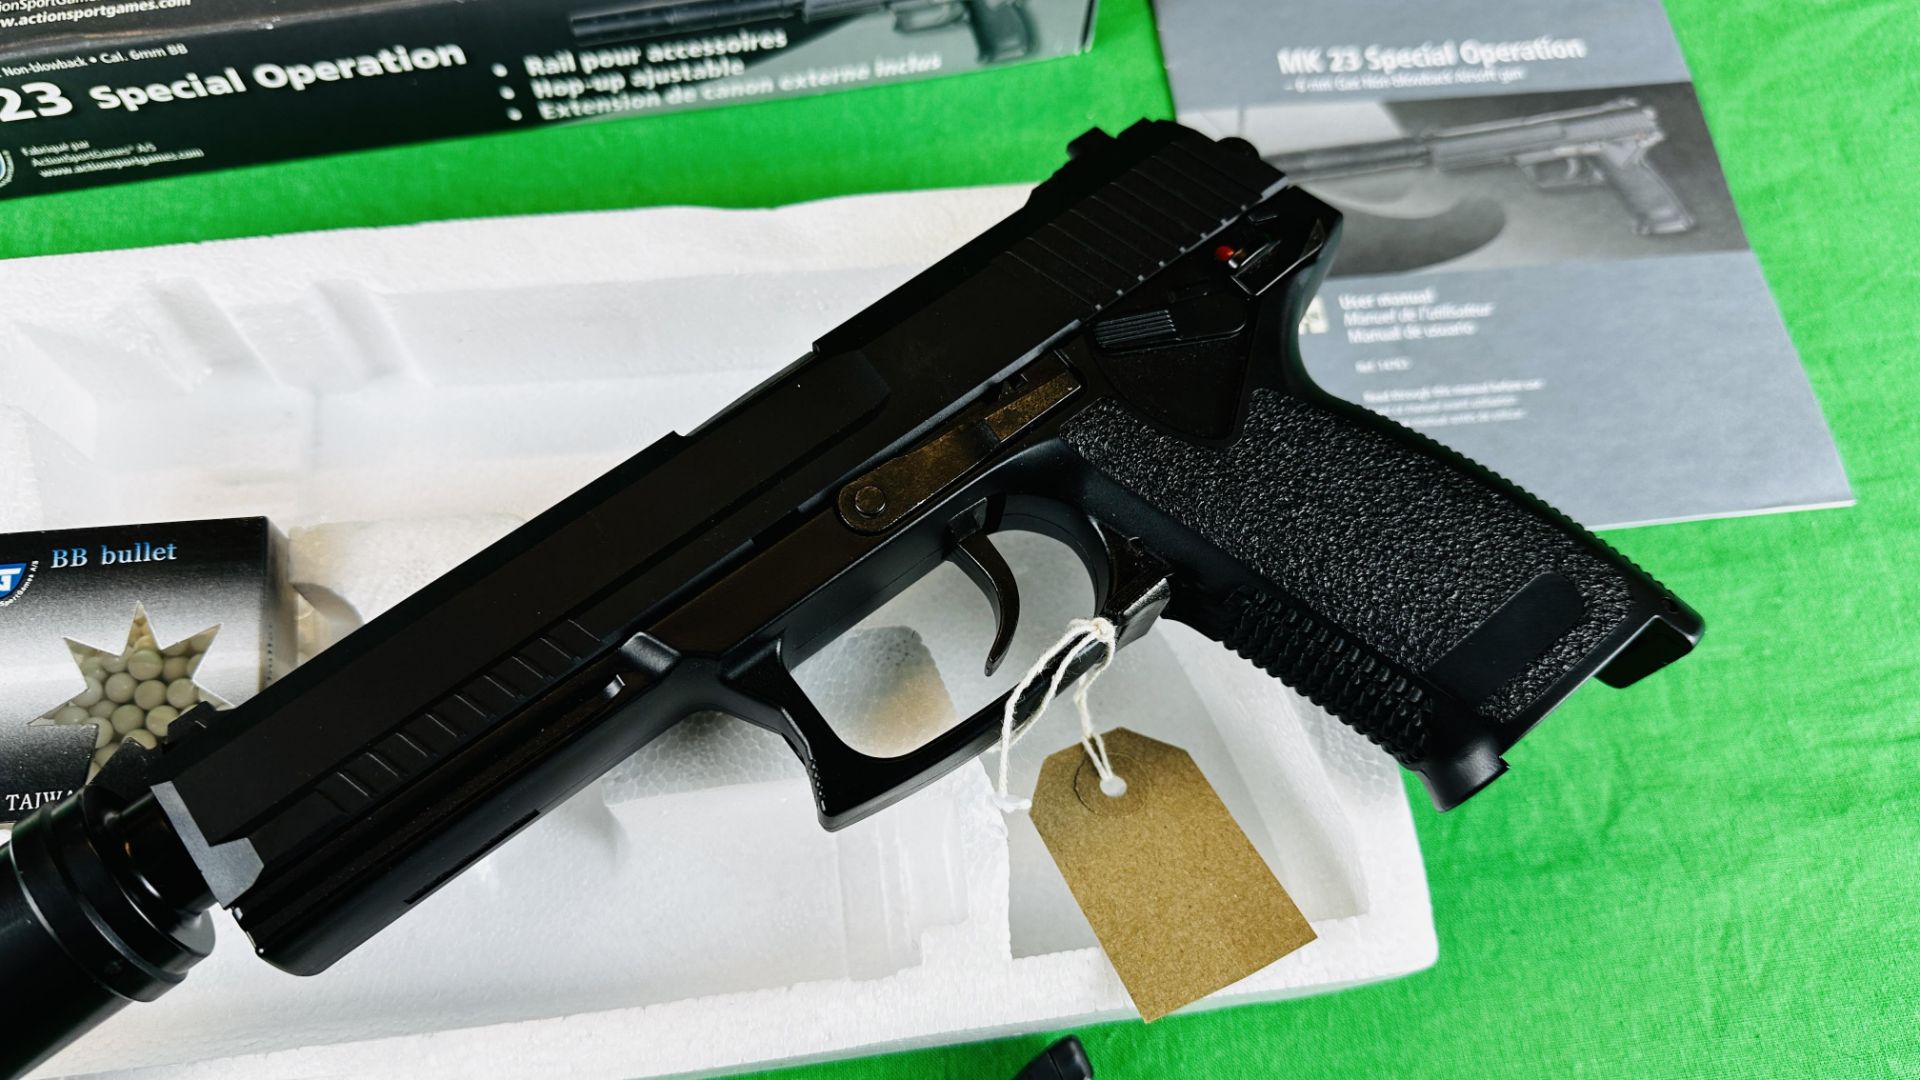 ASG MK23 SPECIAL OPERATION 6MM BB GAS NON-BLOWBACK AIR PISTOL BOXED WITH ACCESSORIES - (ALL GUNS TO - Image 8 of 10